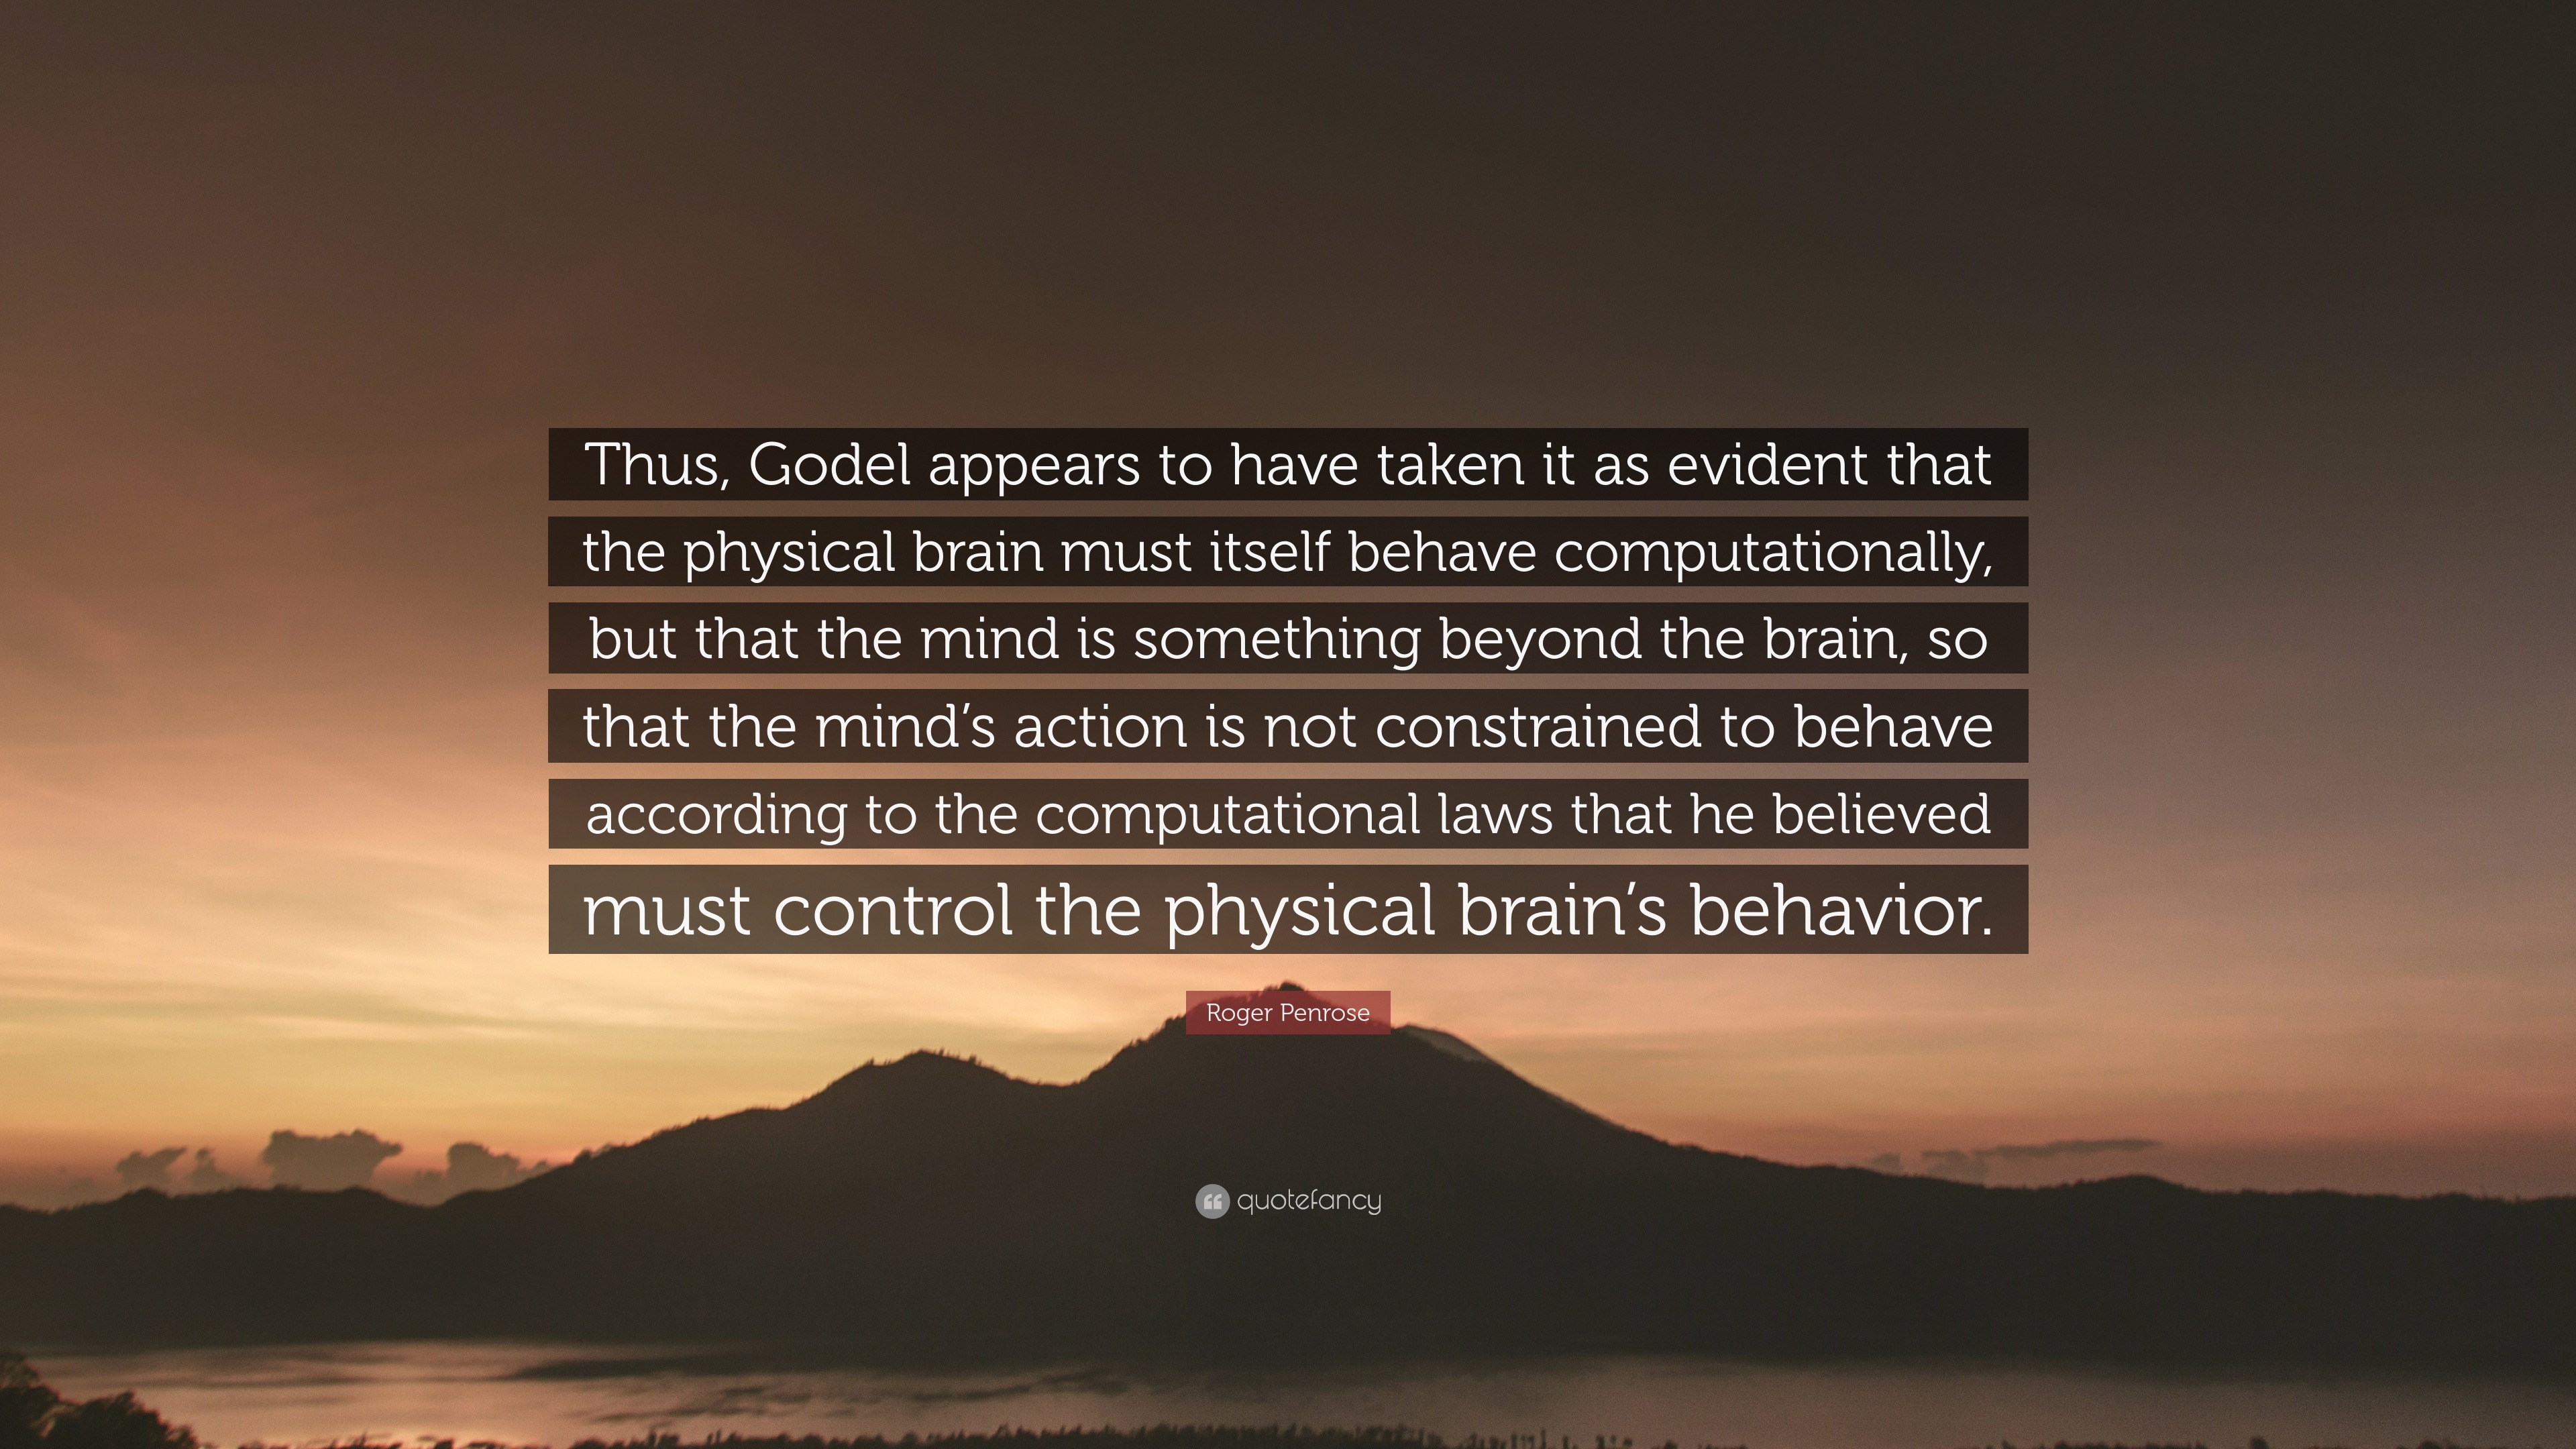 Roger Penrose Quote: “Thus, Godel appears to have taken it as evident ...